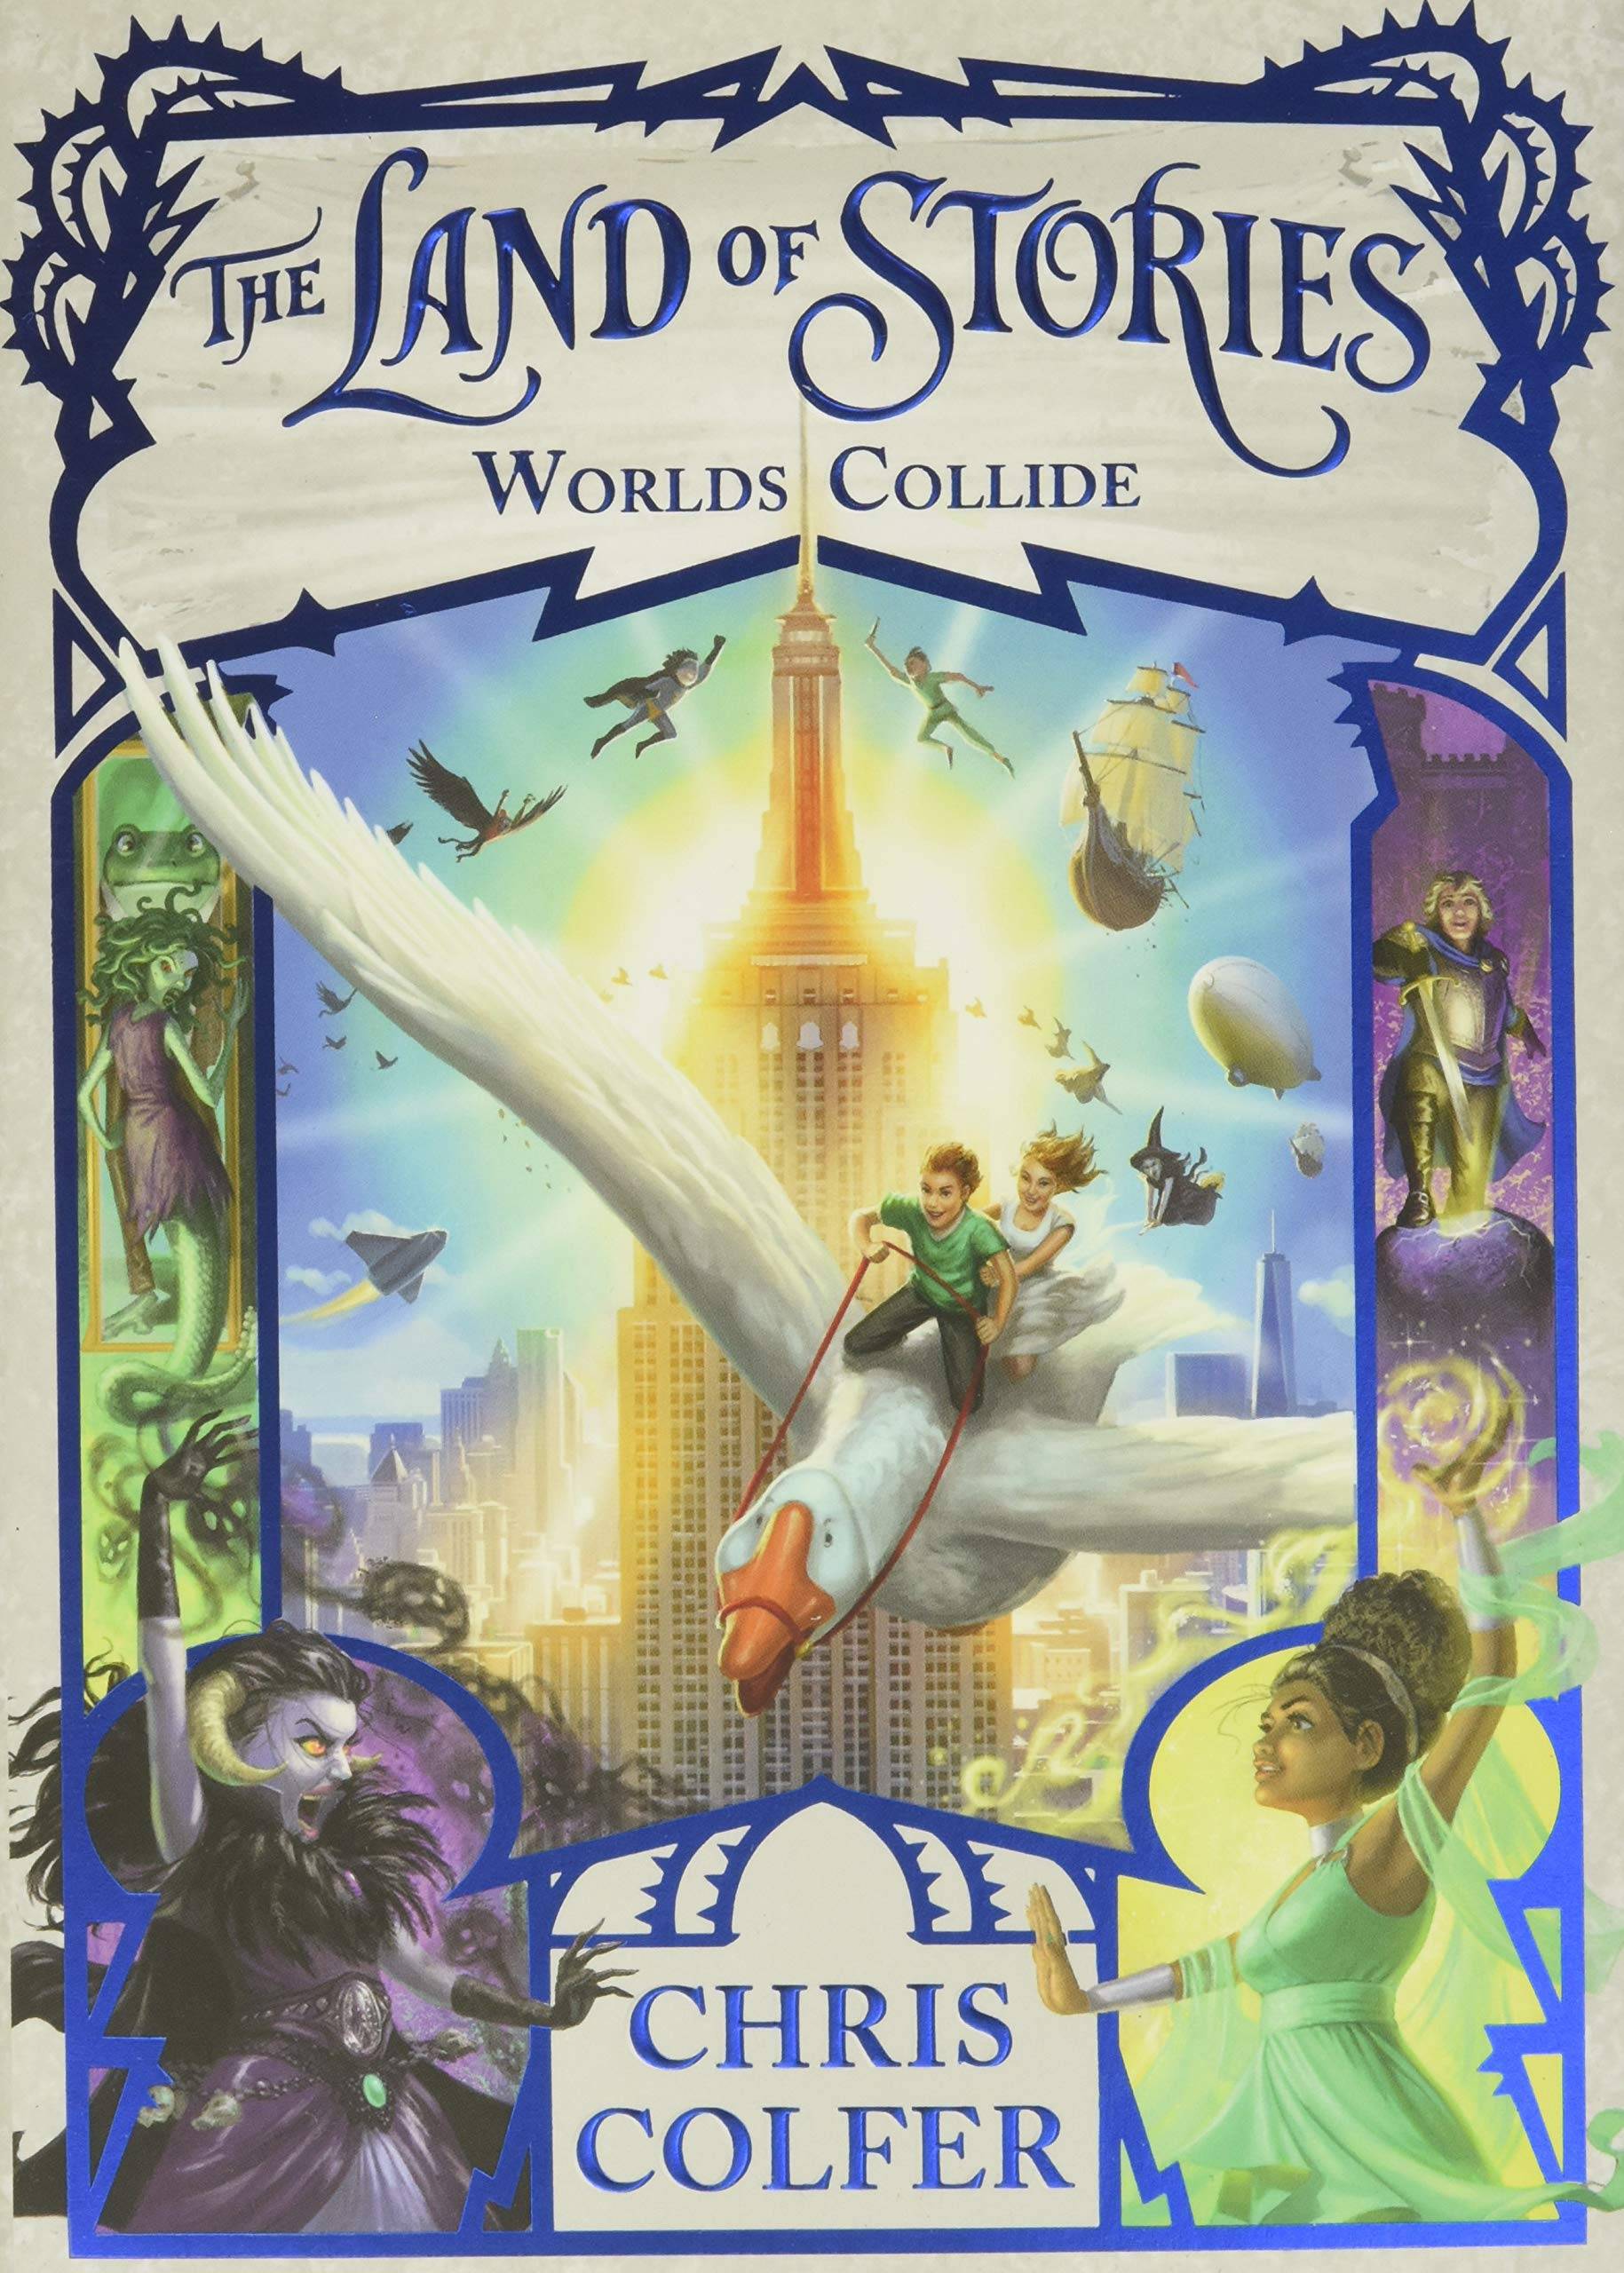 IMG : The Land of Stories Worlds Collide#6